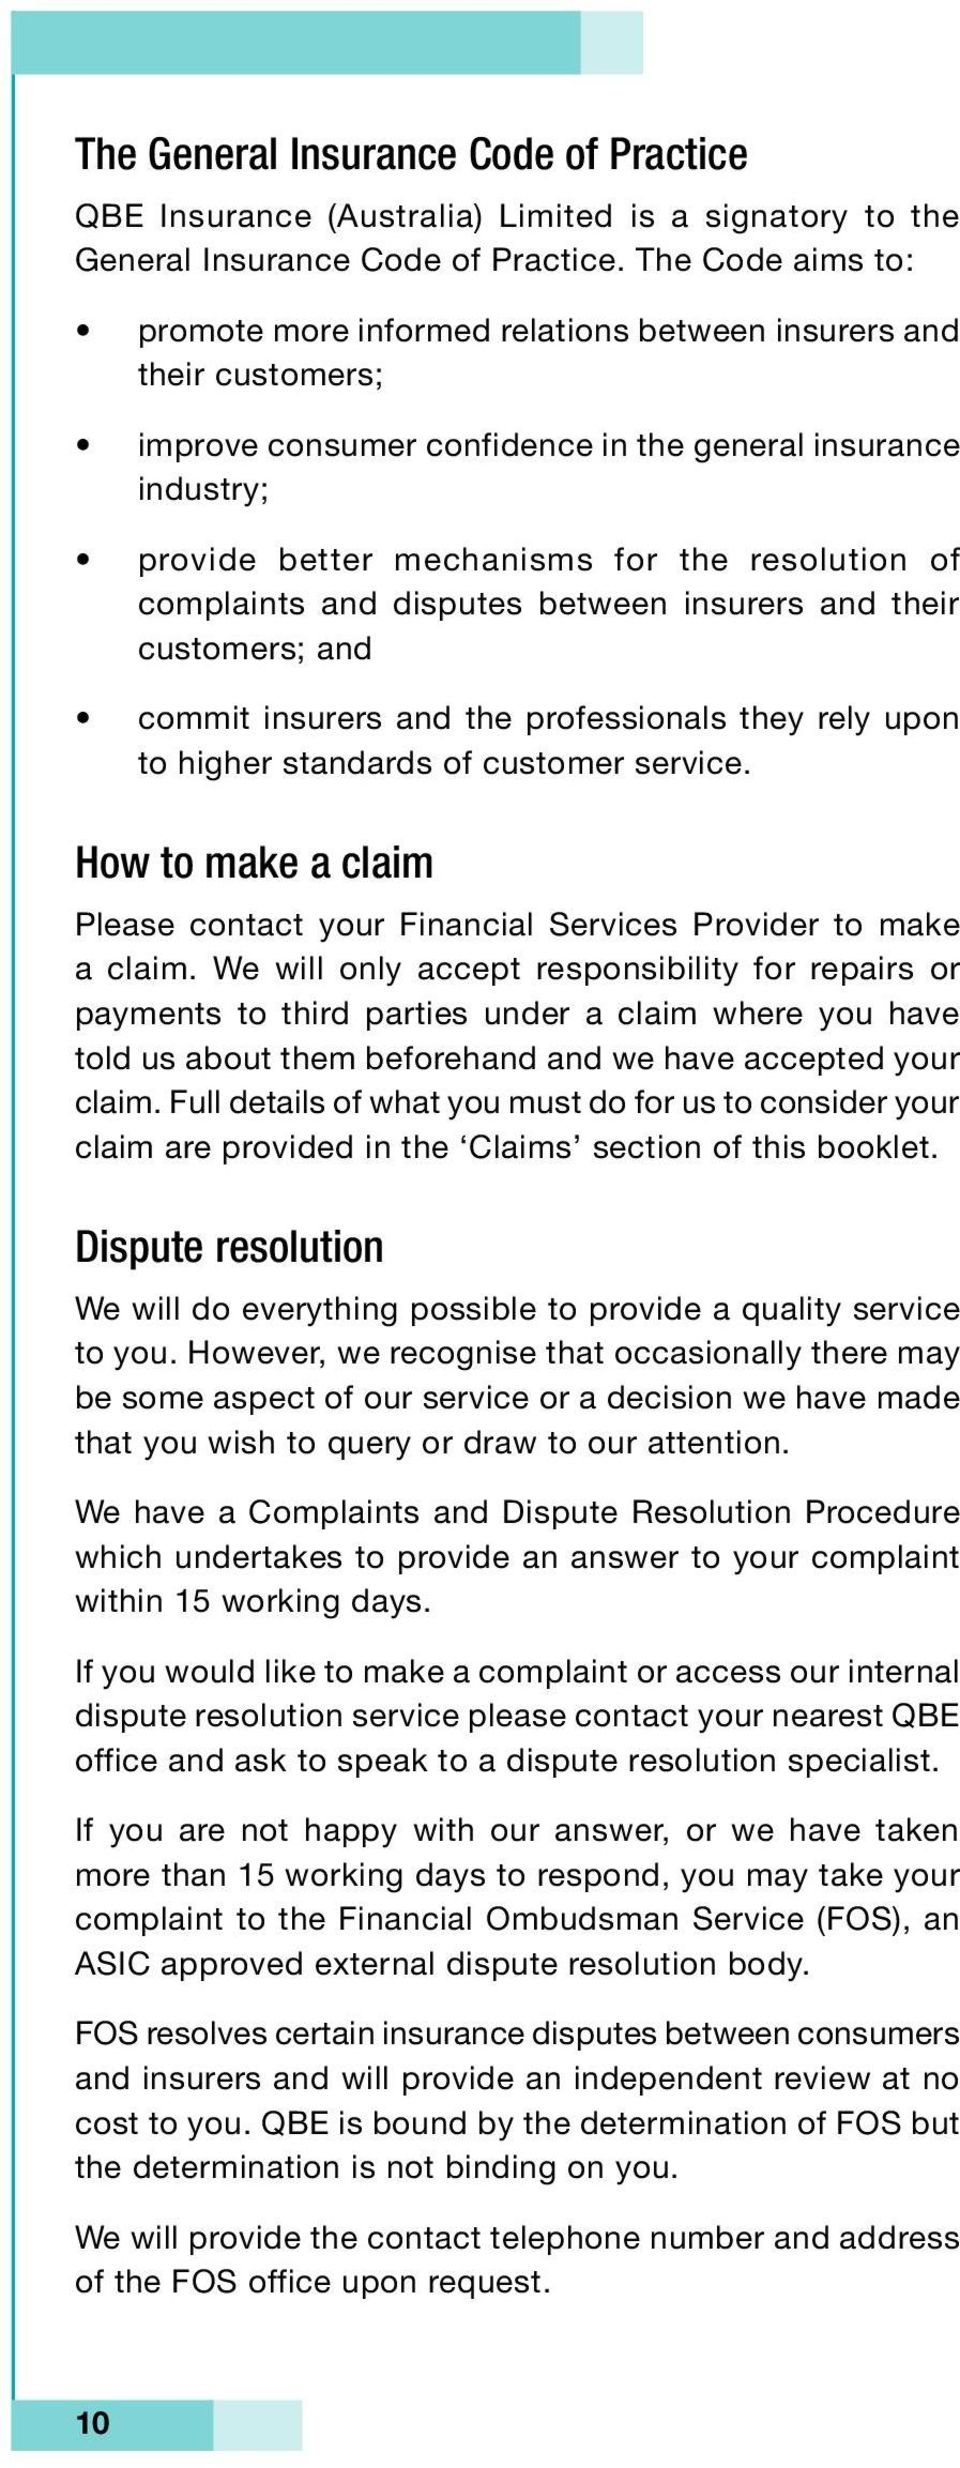 complaints and disputes between insurers and their customers; and commit insurers and the professionals they rely upon to higher standards of customer service.